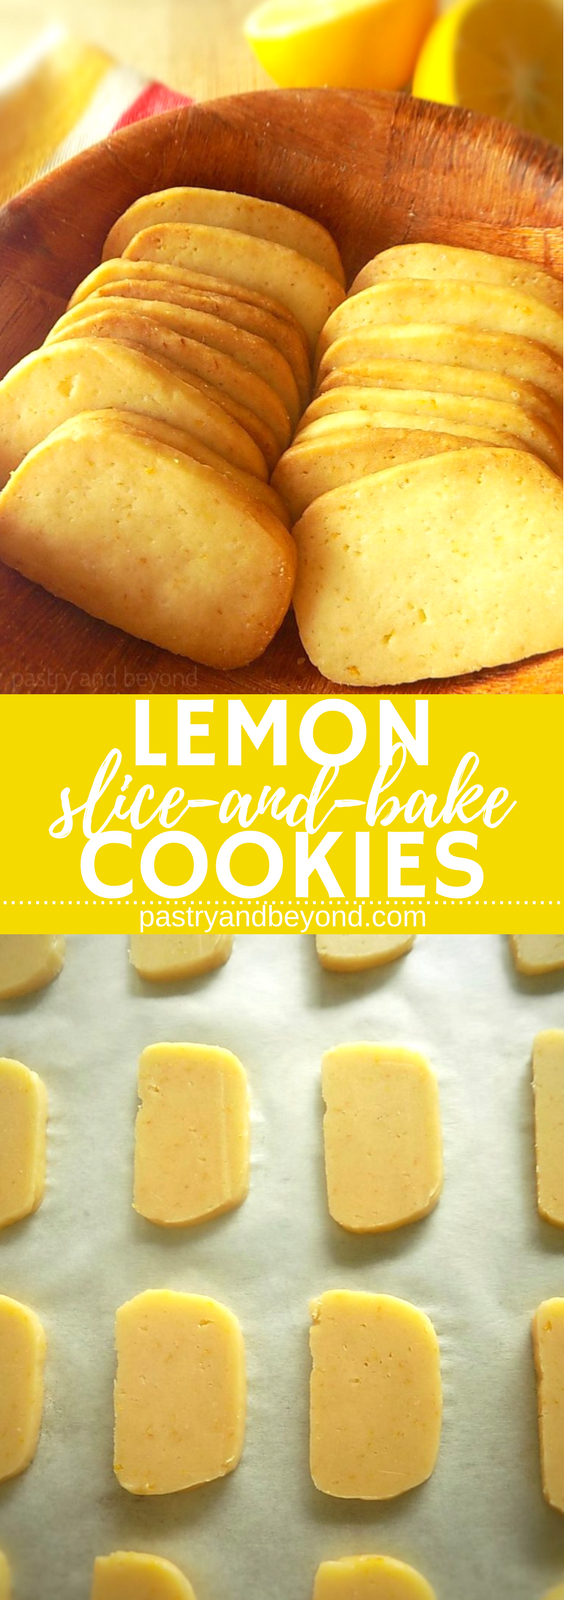 Lemon slice-and-bake cookies in a wooden bowl.